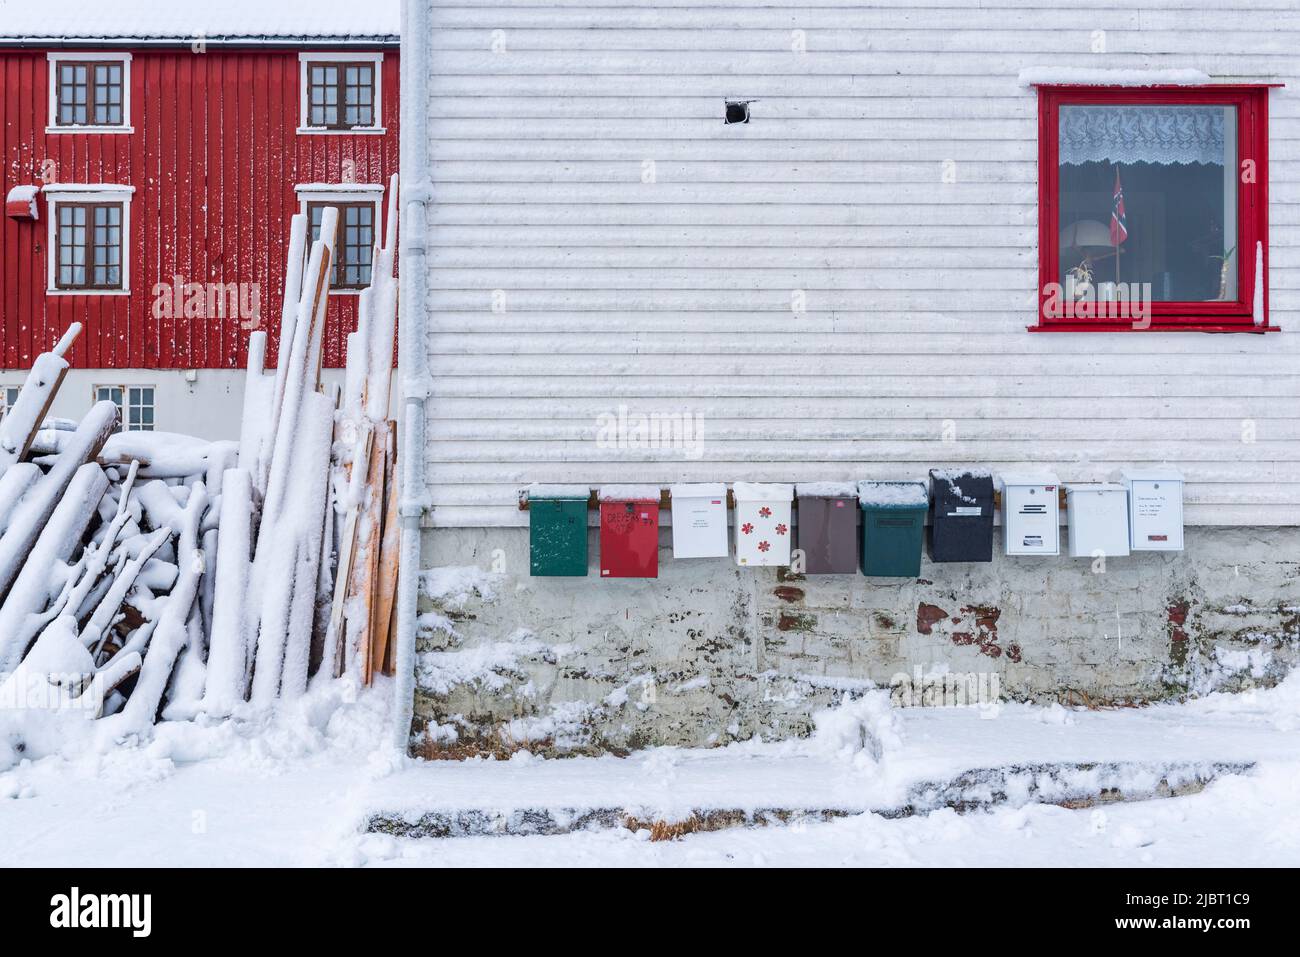 Norway, Nordland County, Lofoten Islands, Henningsvaer, red house, post boxes, Stock Photo